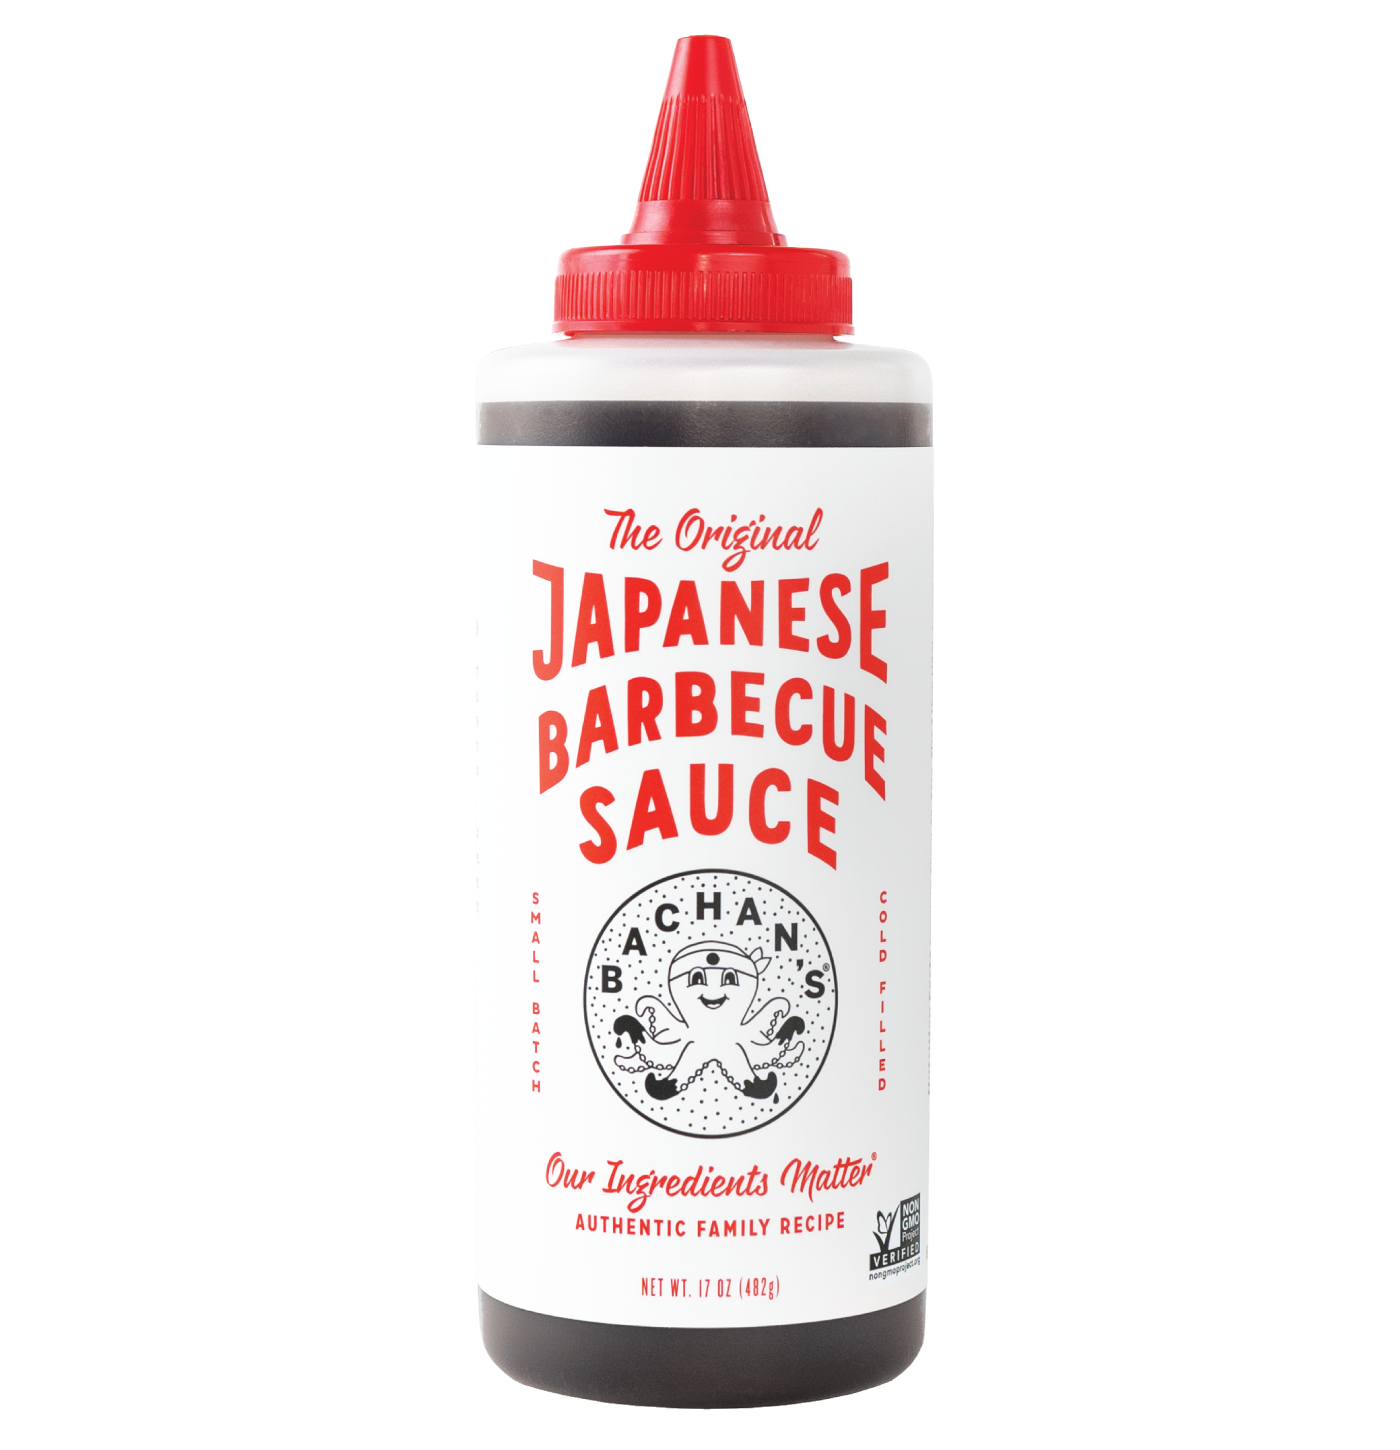 Bachan's - The Original Japanese Barbecue Sauce